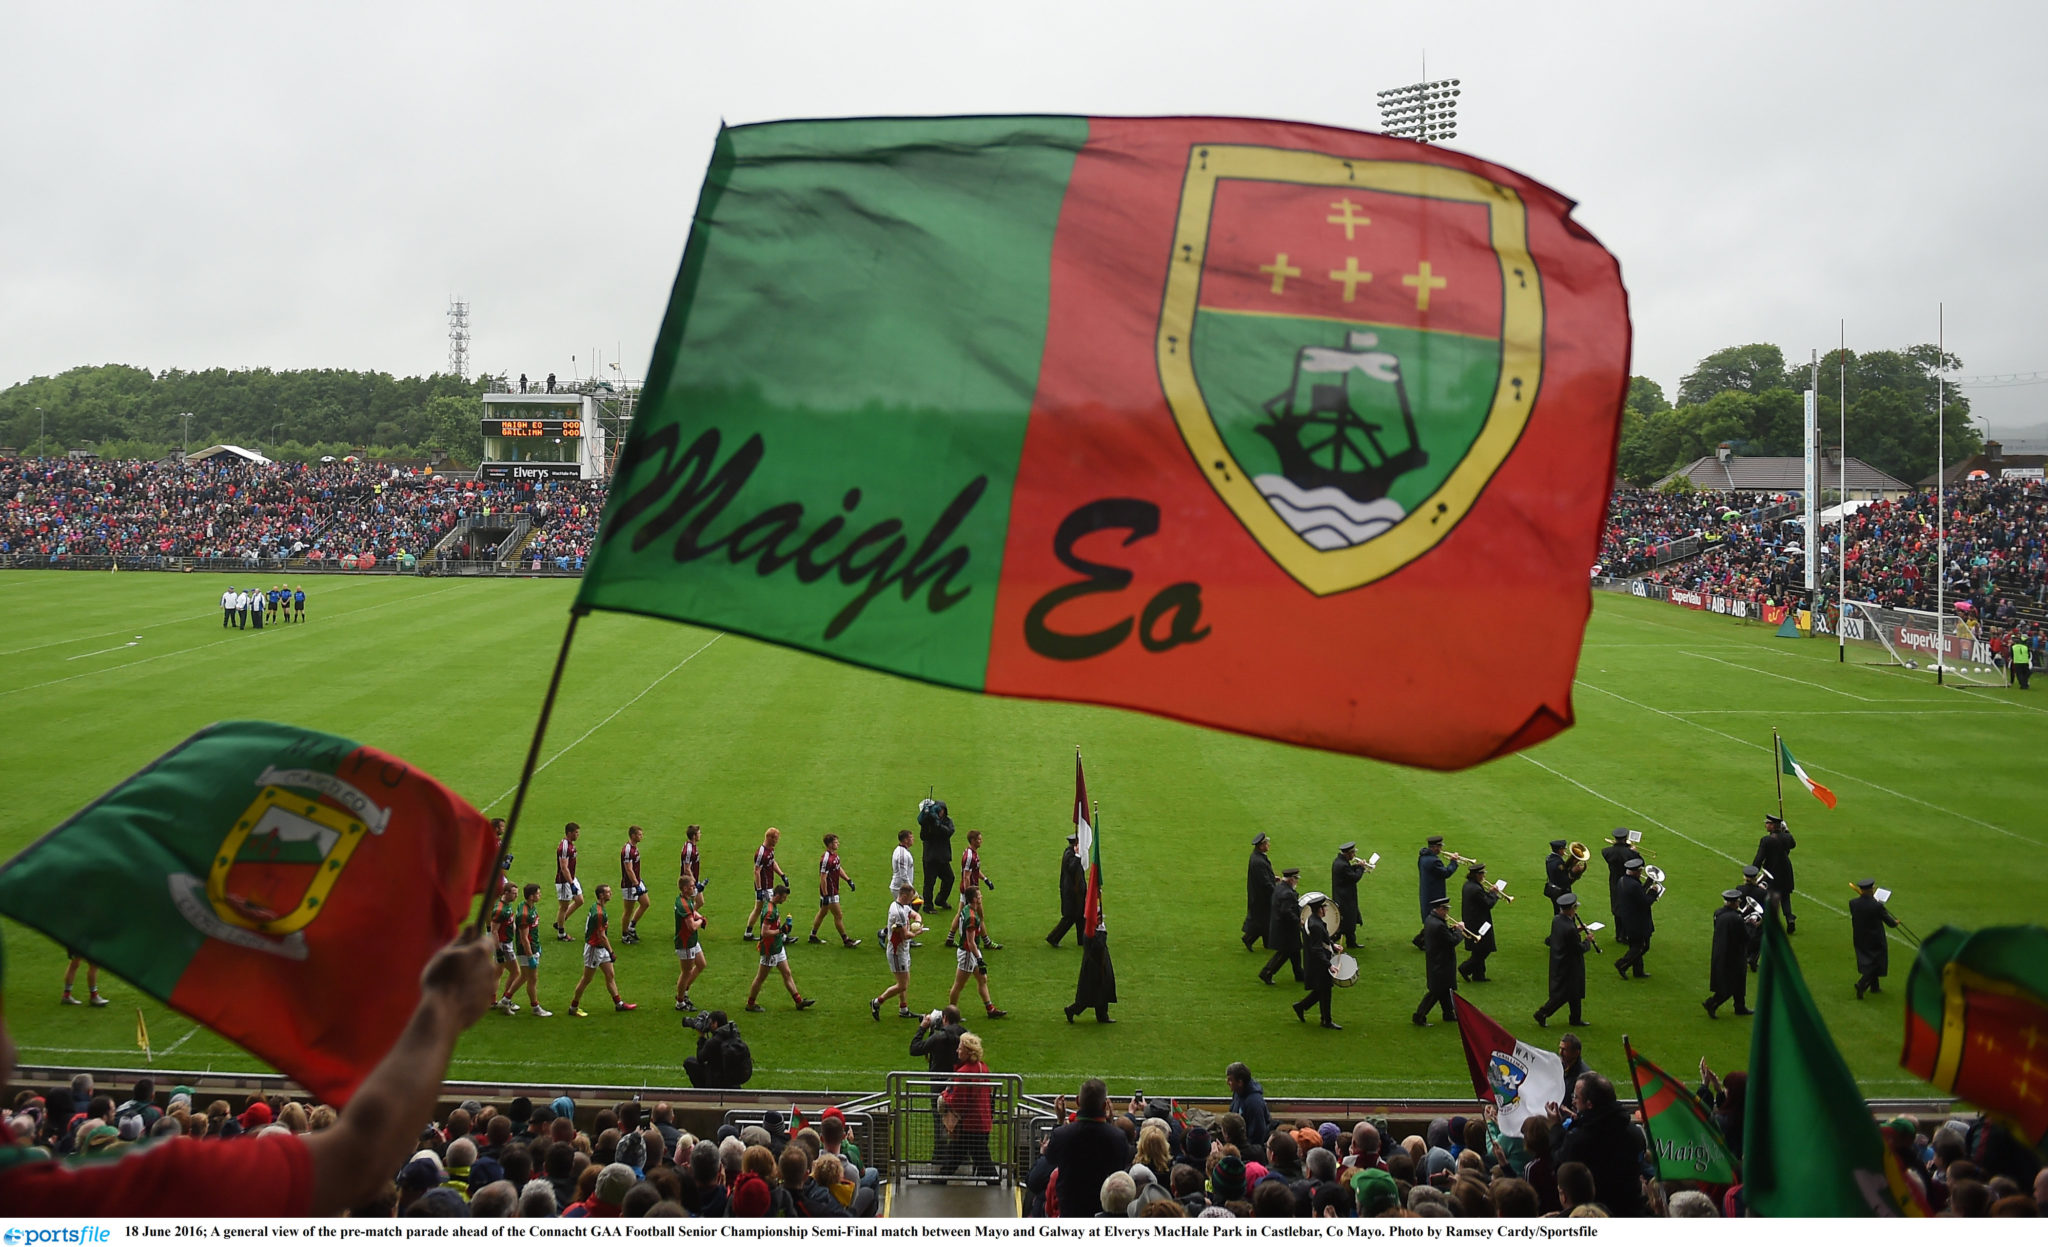 2016, another clash in the storied history of the Galway Mayo rivalry